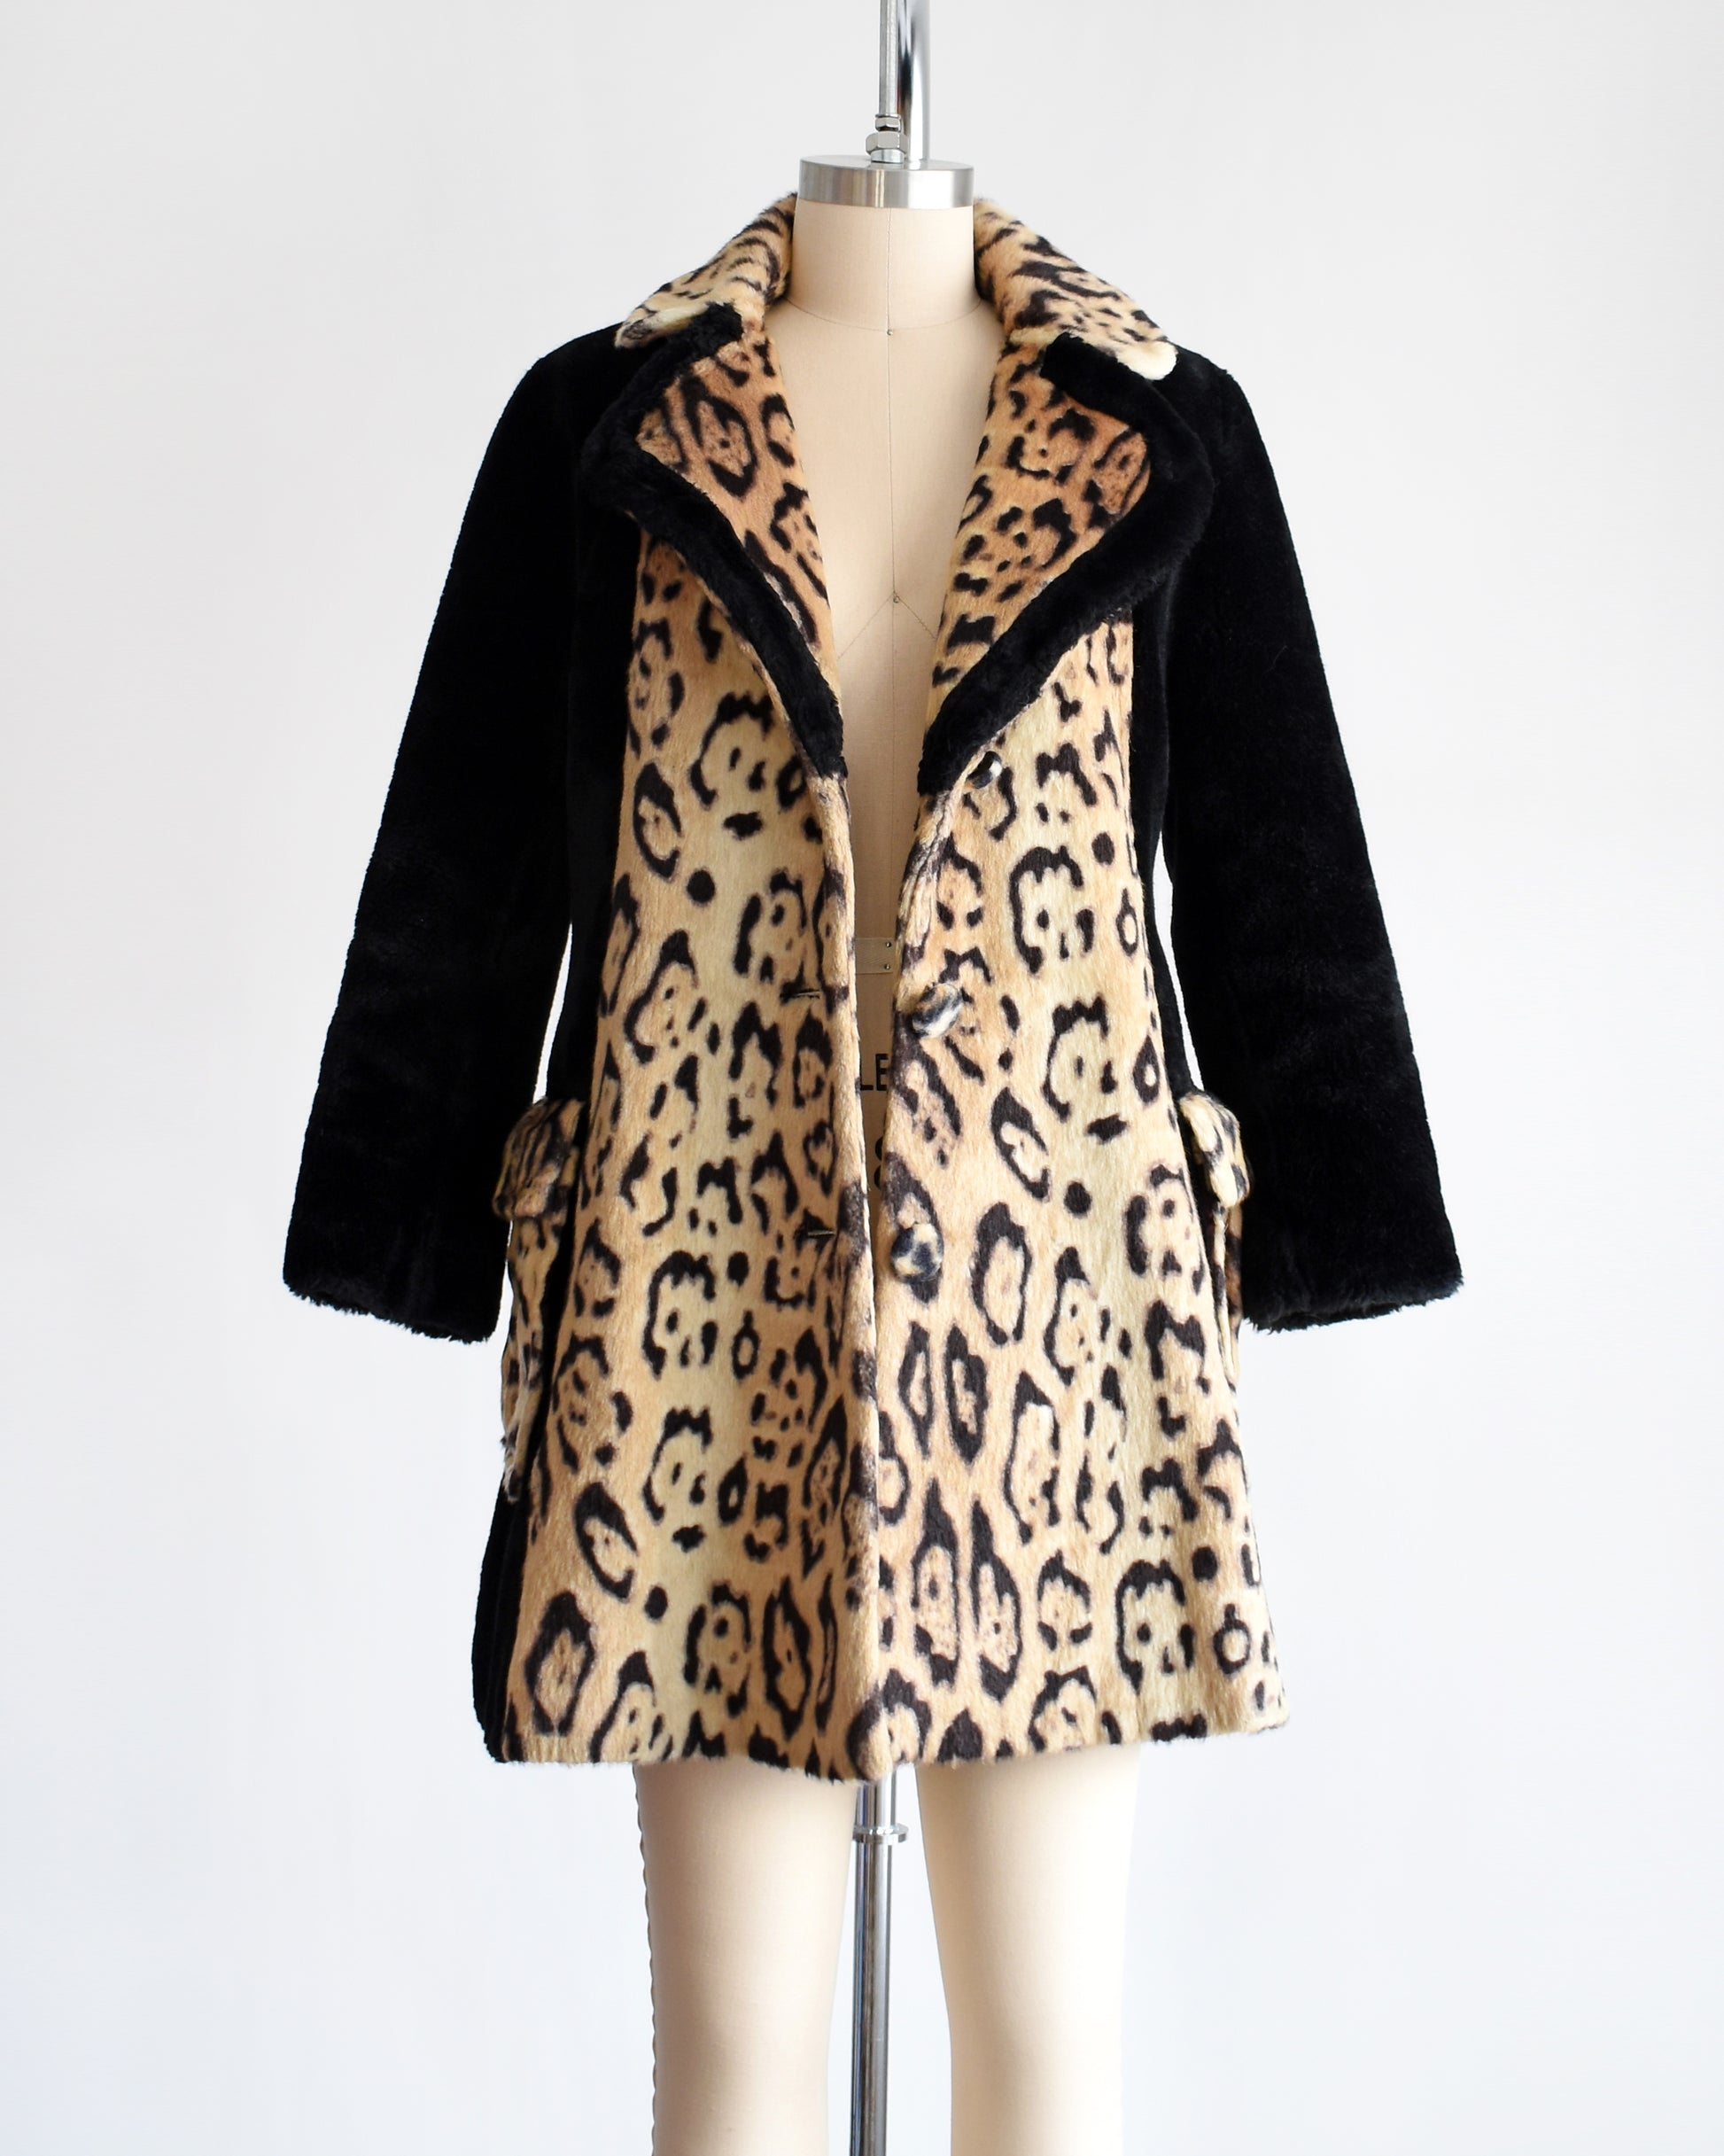 A vintage late 1960s early 1970s leopard faux fur coat that has large leopard print on the collar, down the front, and on the large side pockets. Black plush long sleeves, sides, and back. Matching black trim on the collar. The coat is open in this photo.